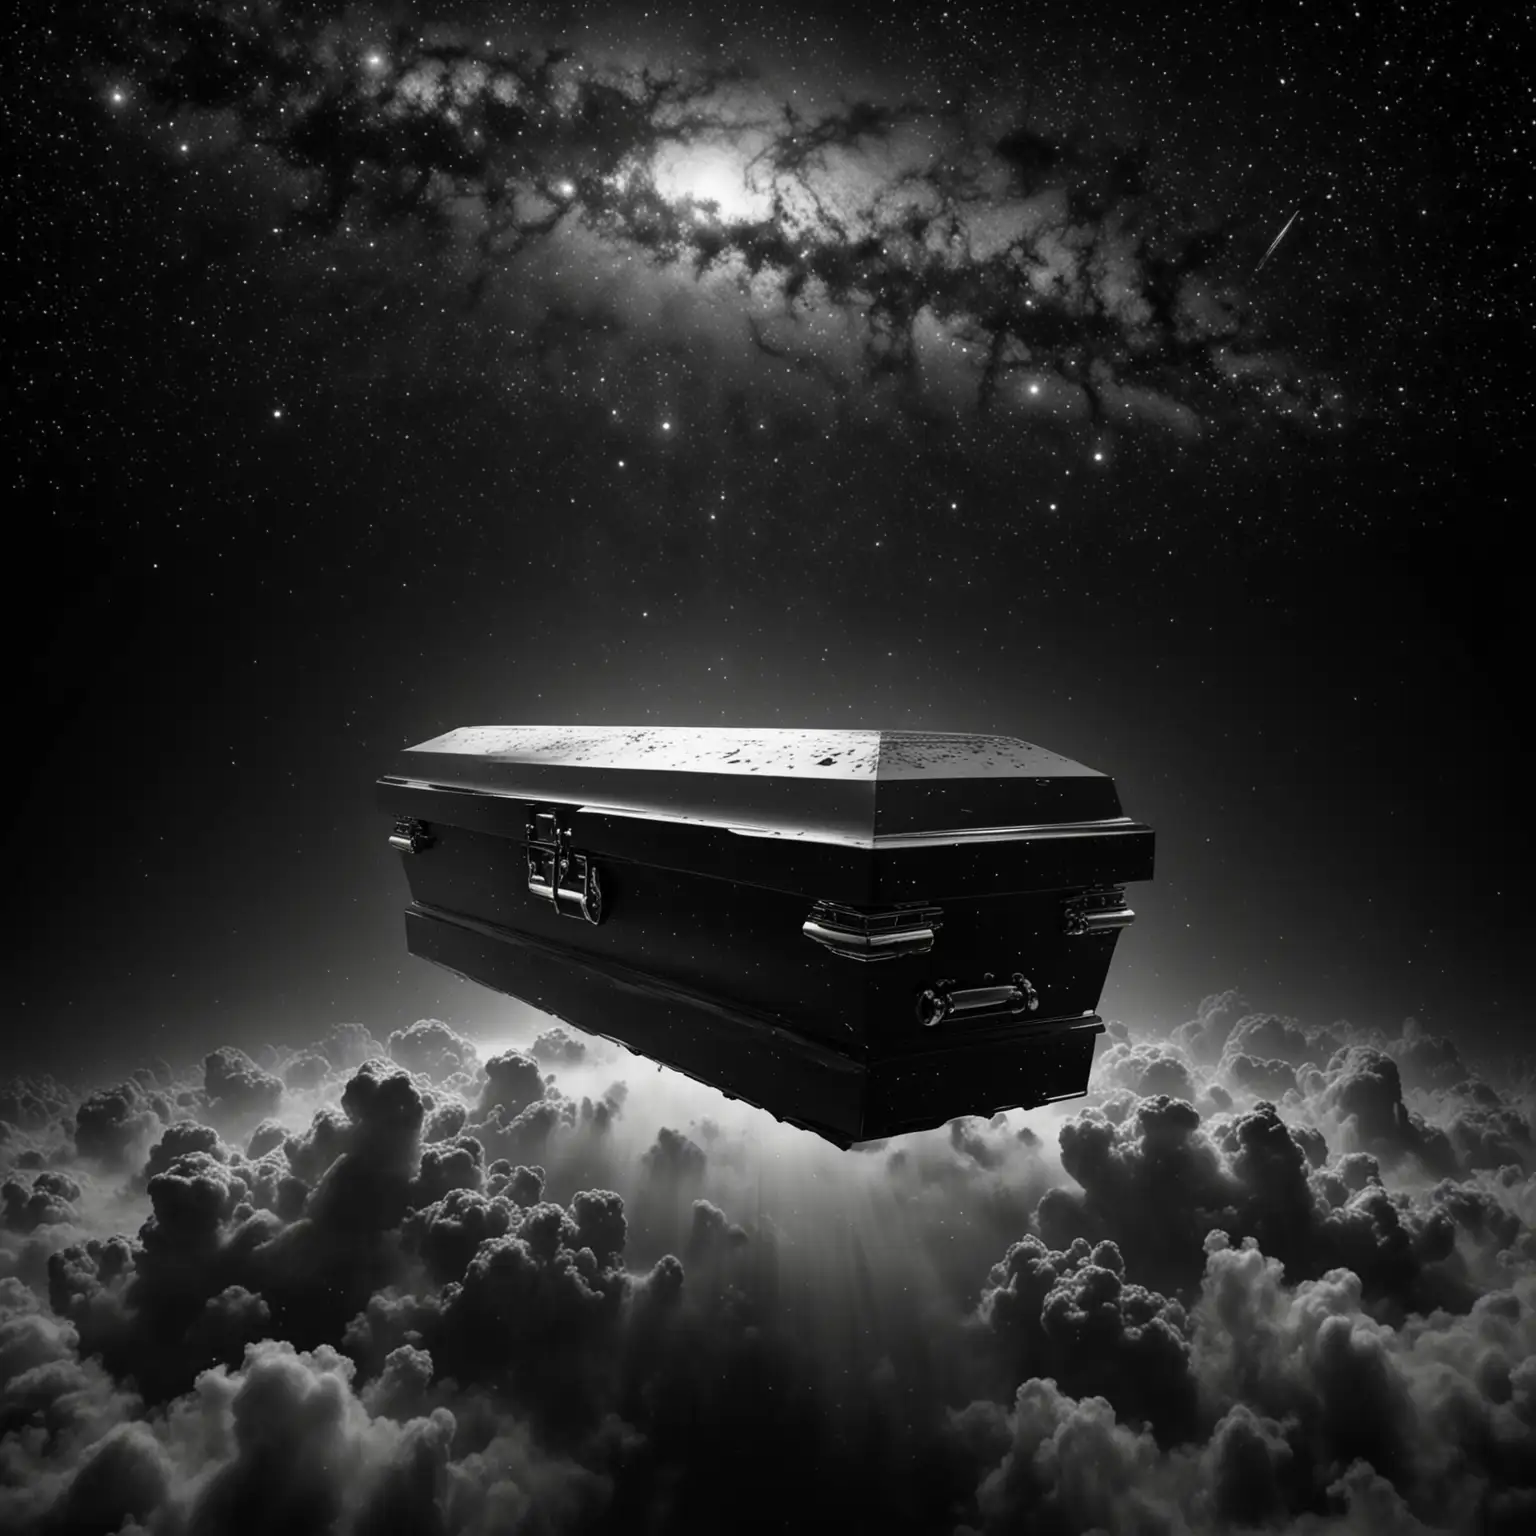 Closed tapered electric coffin floating in a 3D universe 
Cosmos
Image bordered by black gradient
